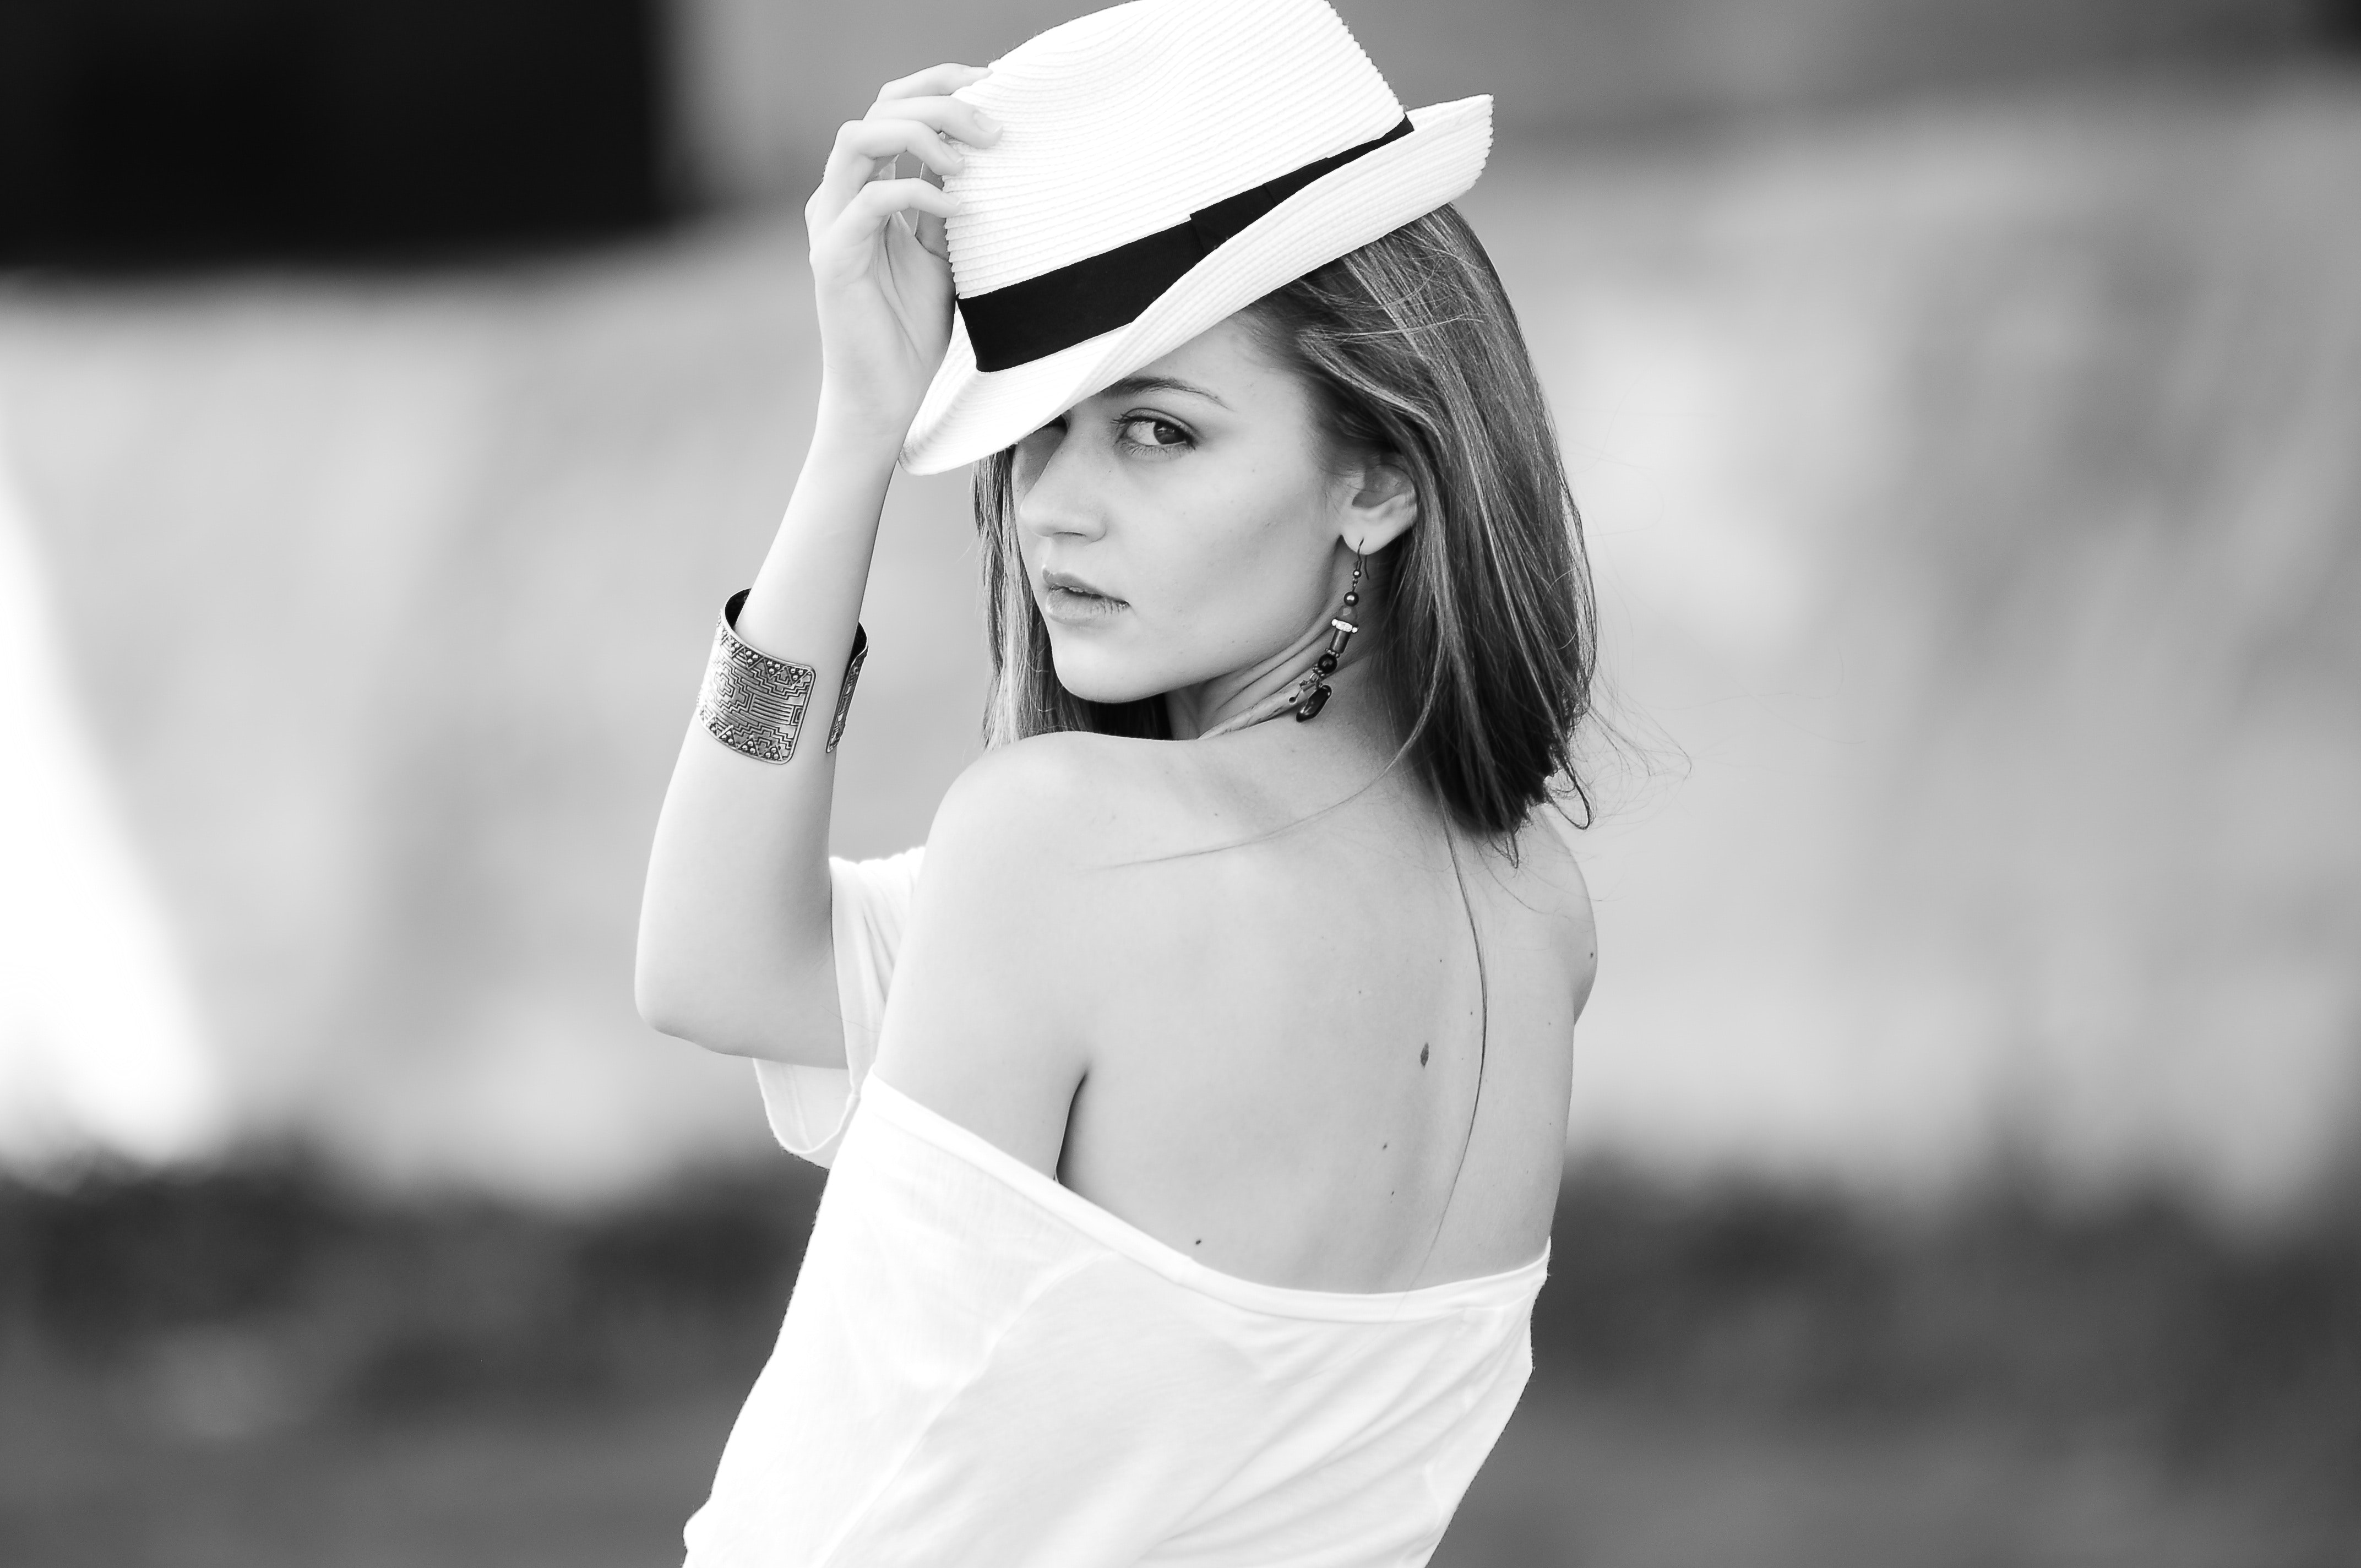 Black And White Fashion Photography